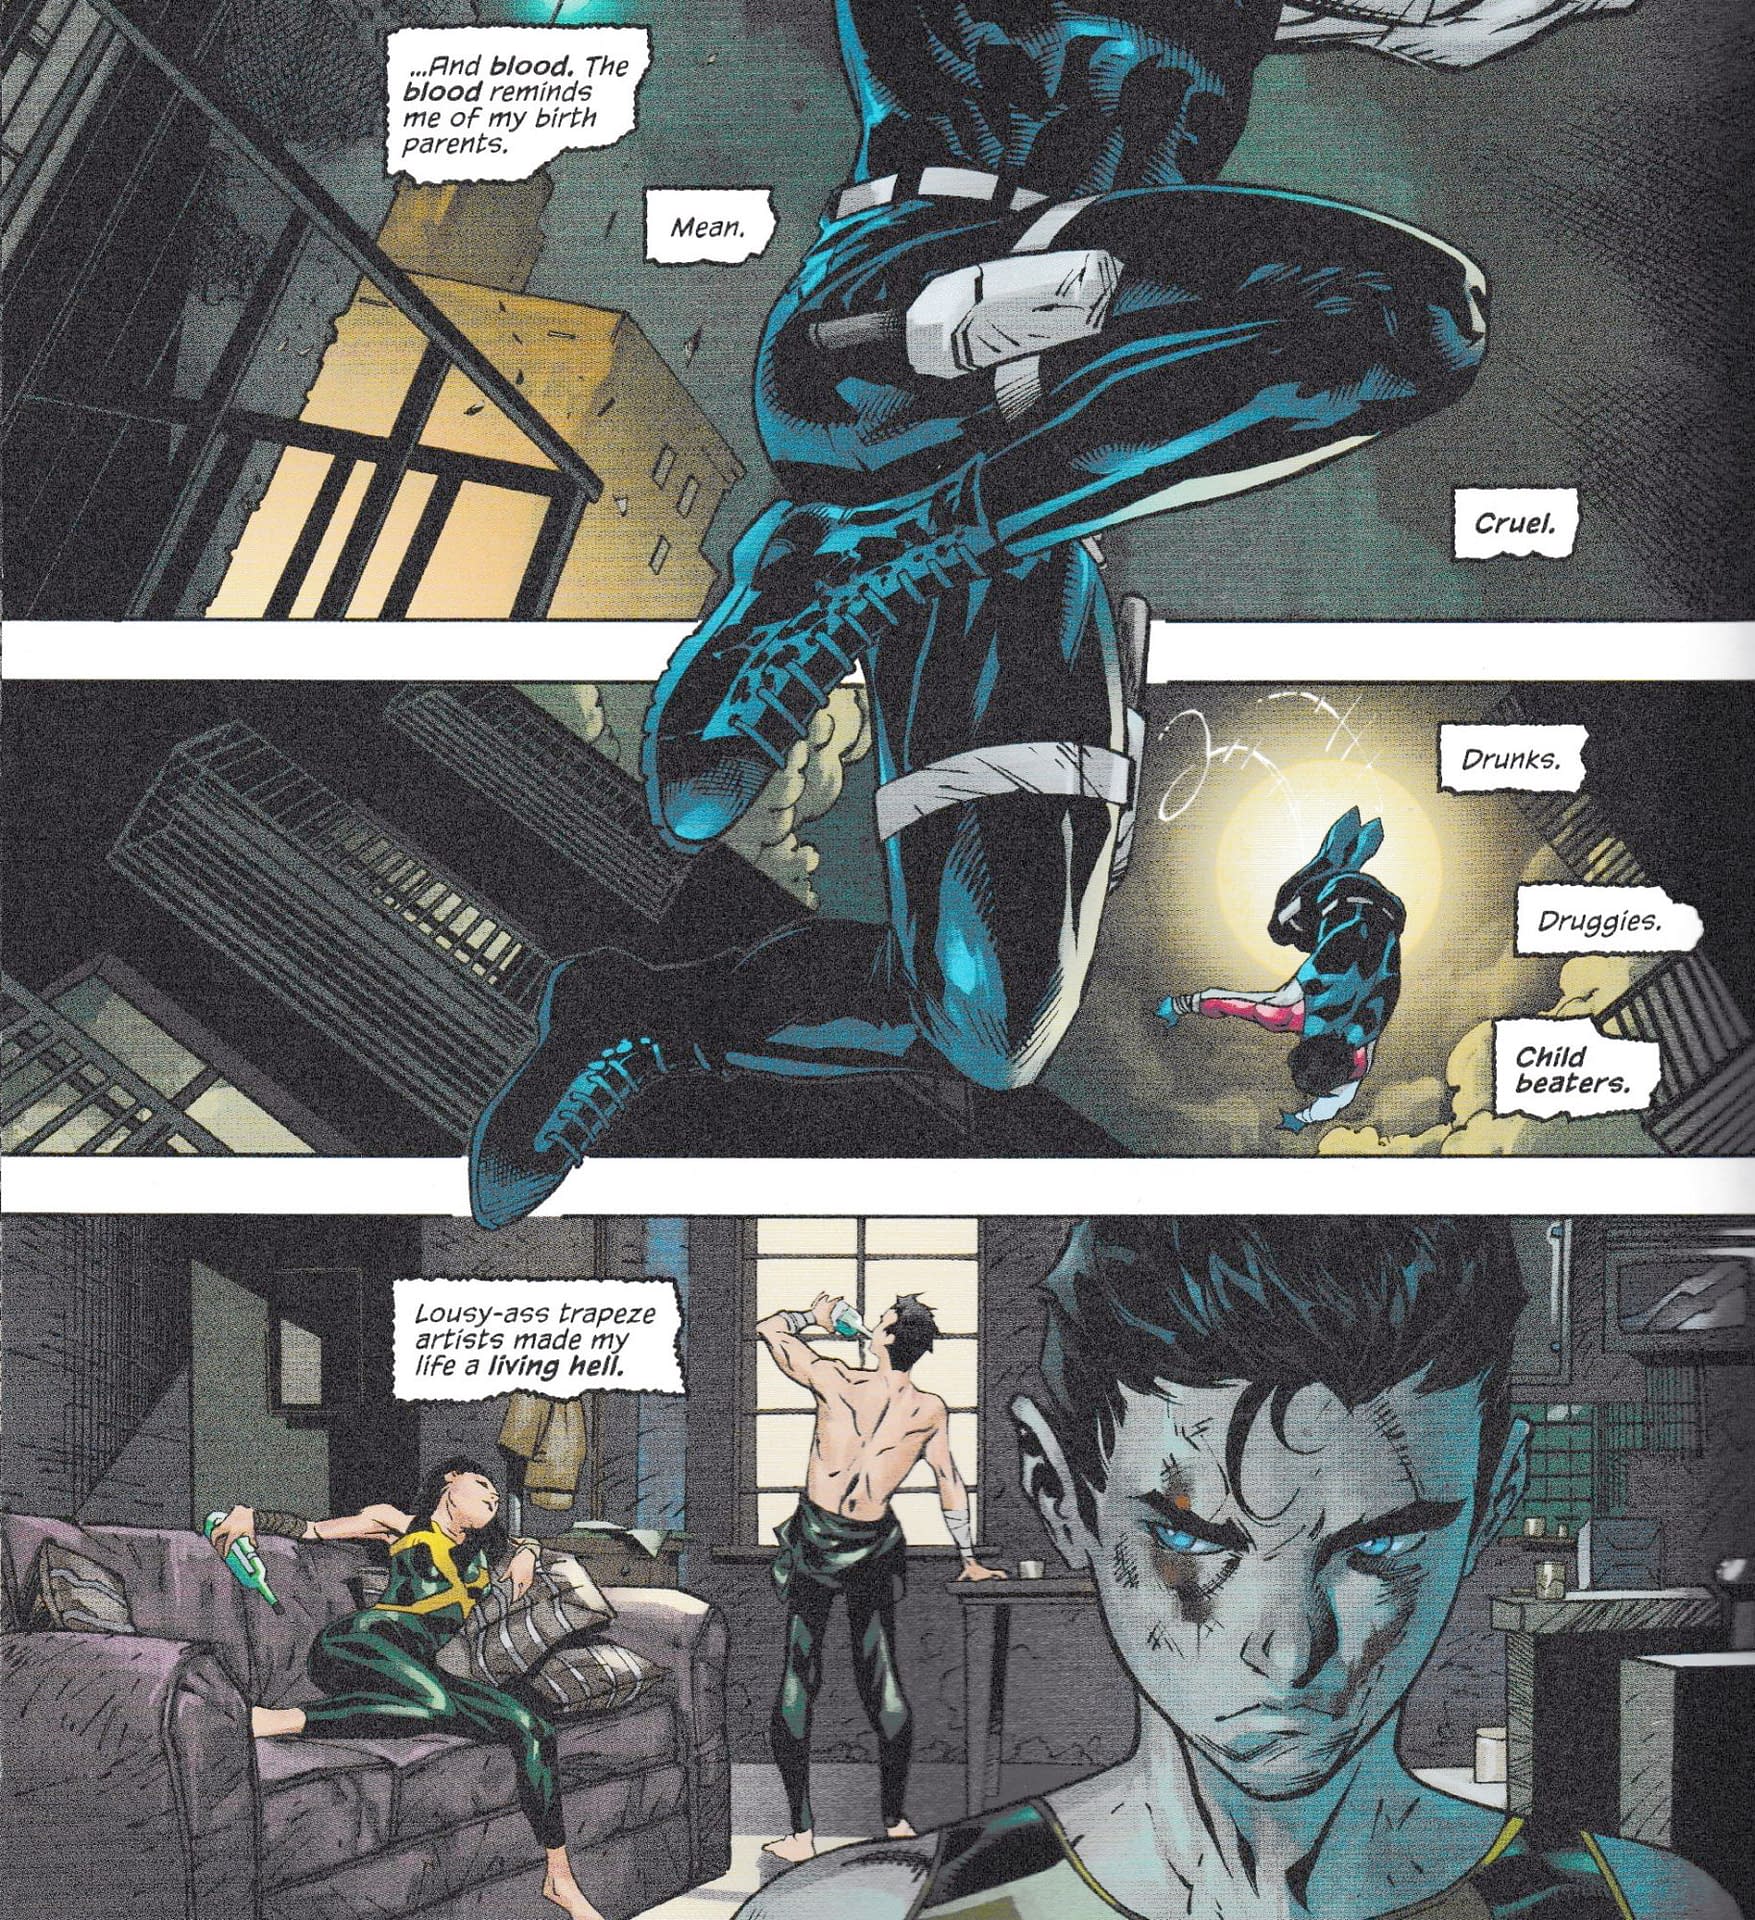 A New Origin (For Now) For Dick Grayson In Nightwing #73 (Spoilers)